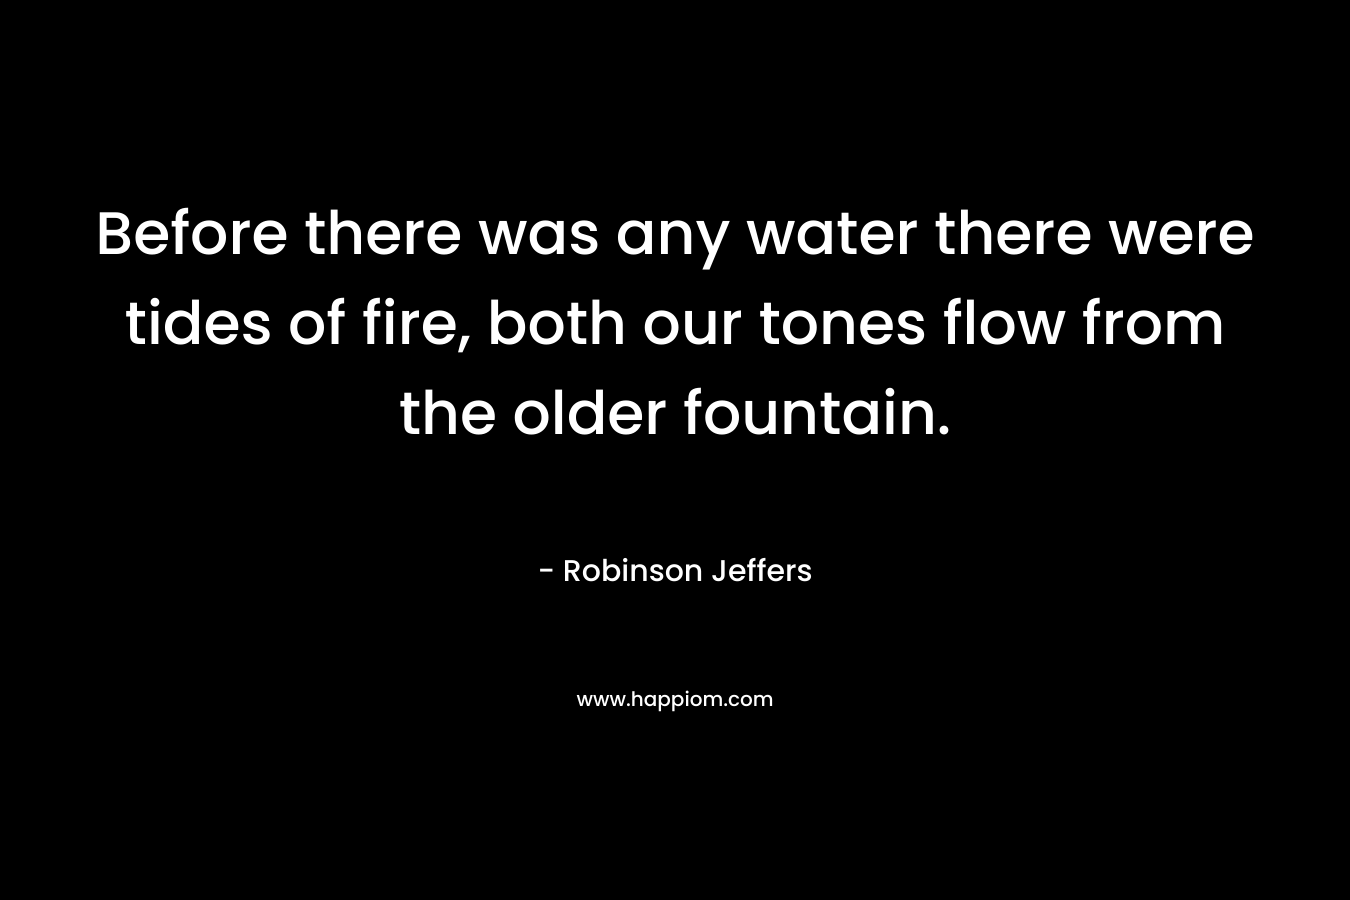 Before there was any water there were tides of fire, both our tones flow from the older fountain. – Robinson Jeffers